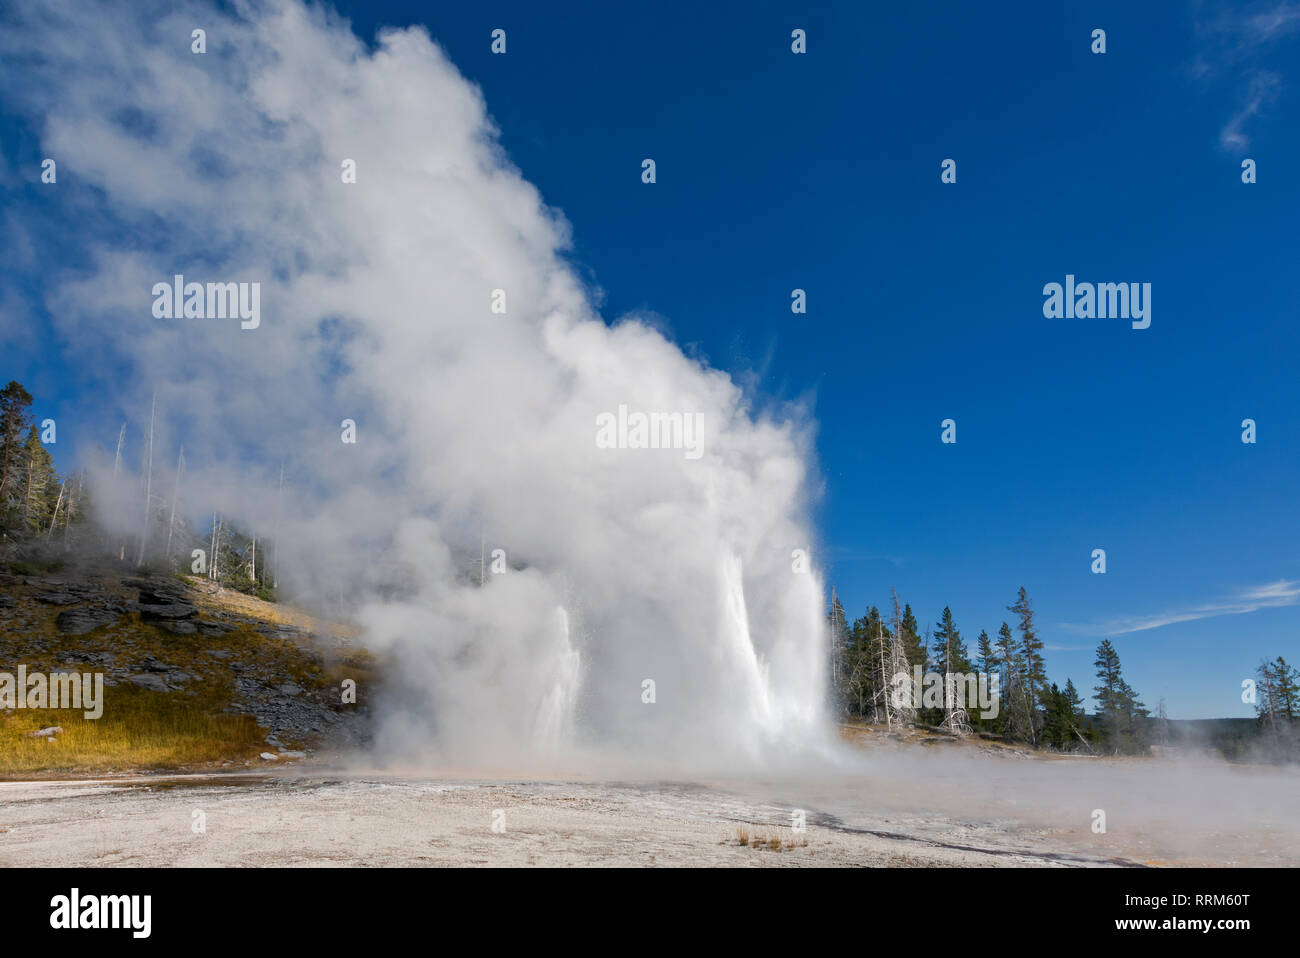 WY03865-00...WYOMING - Grand Geyser surrounded by Vent and Turban Geysers erupting in the Upper Geyser Basin of Yellowstone National Park. Stock Photo